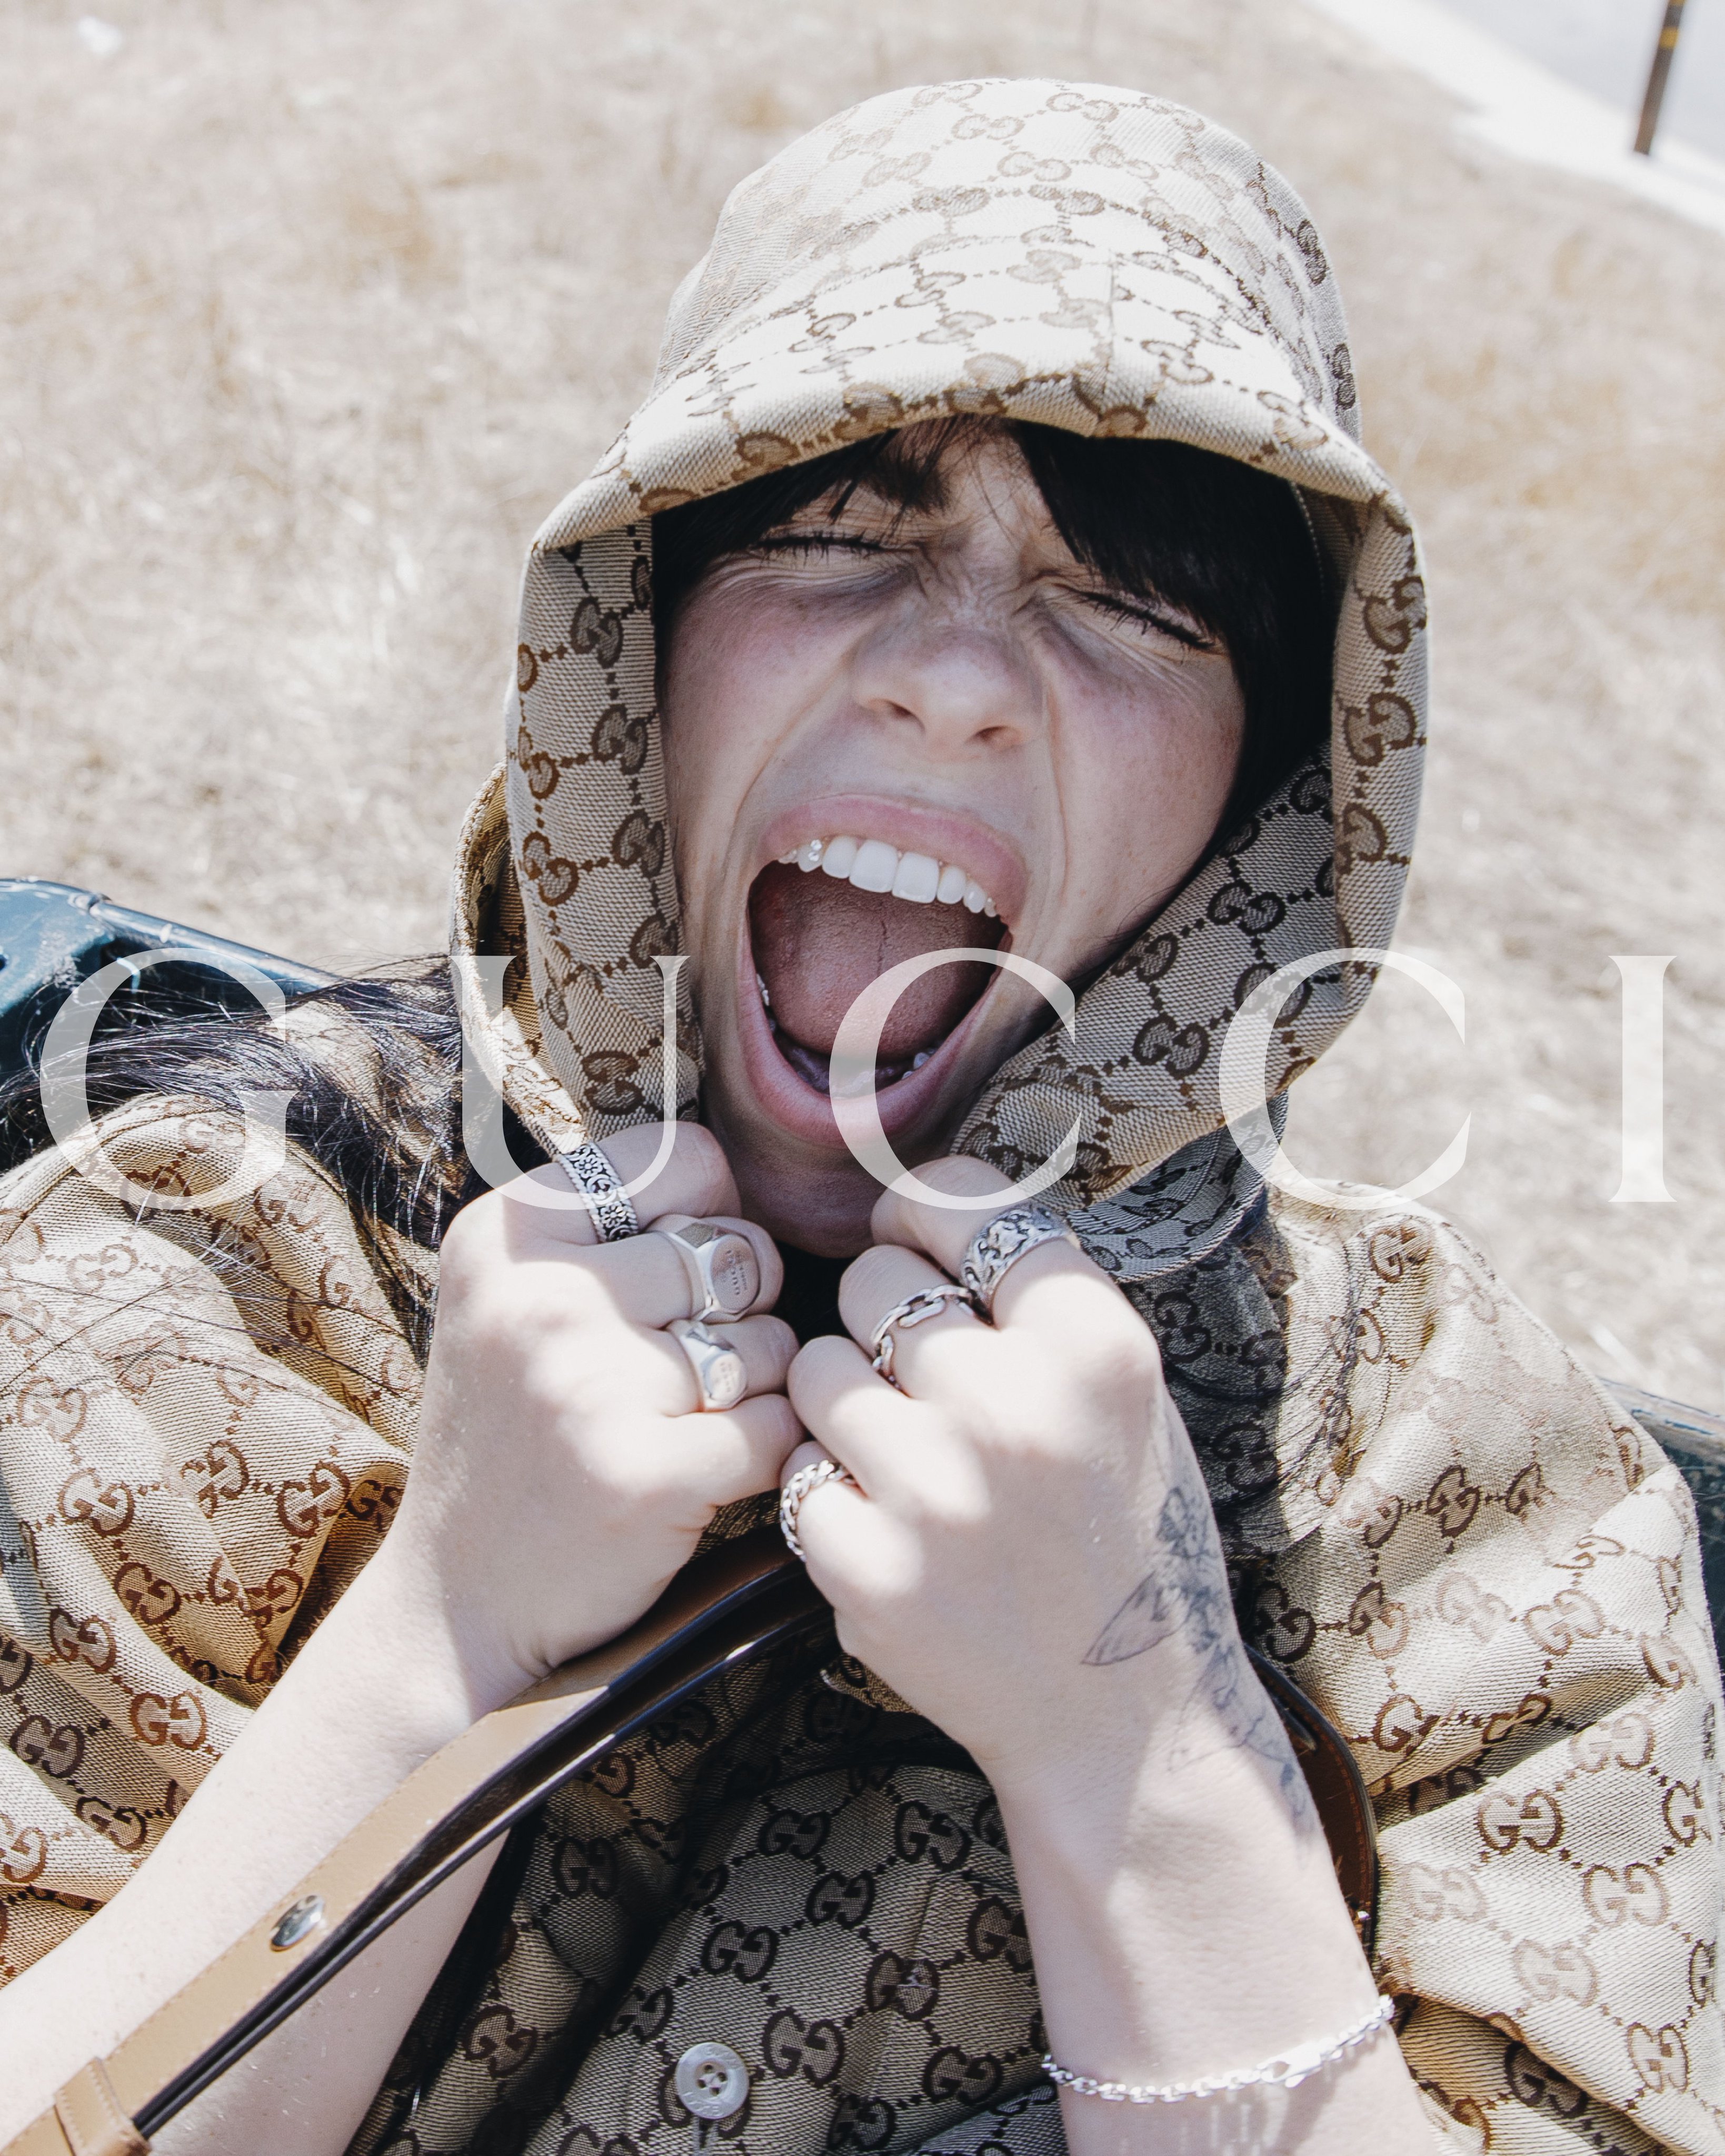 Billie Eilish Fronts Gucci Campaign for Bag in Animal-free Demetra